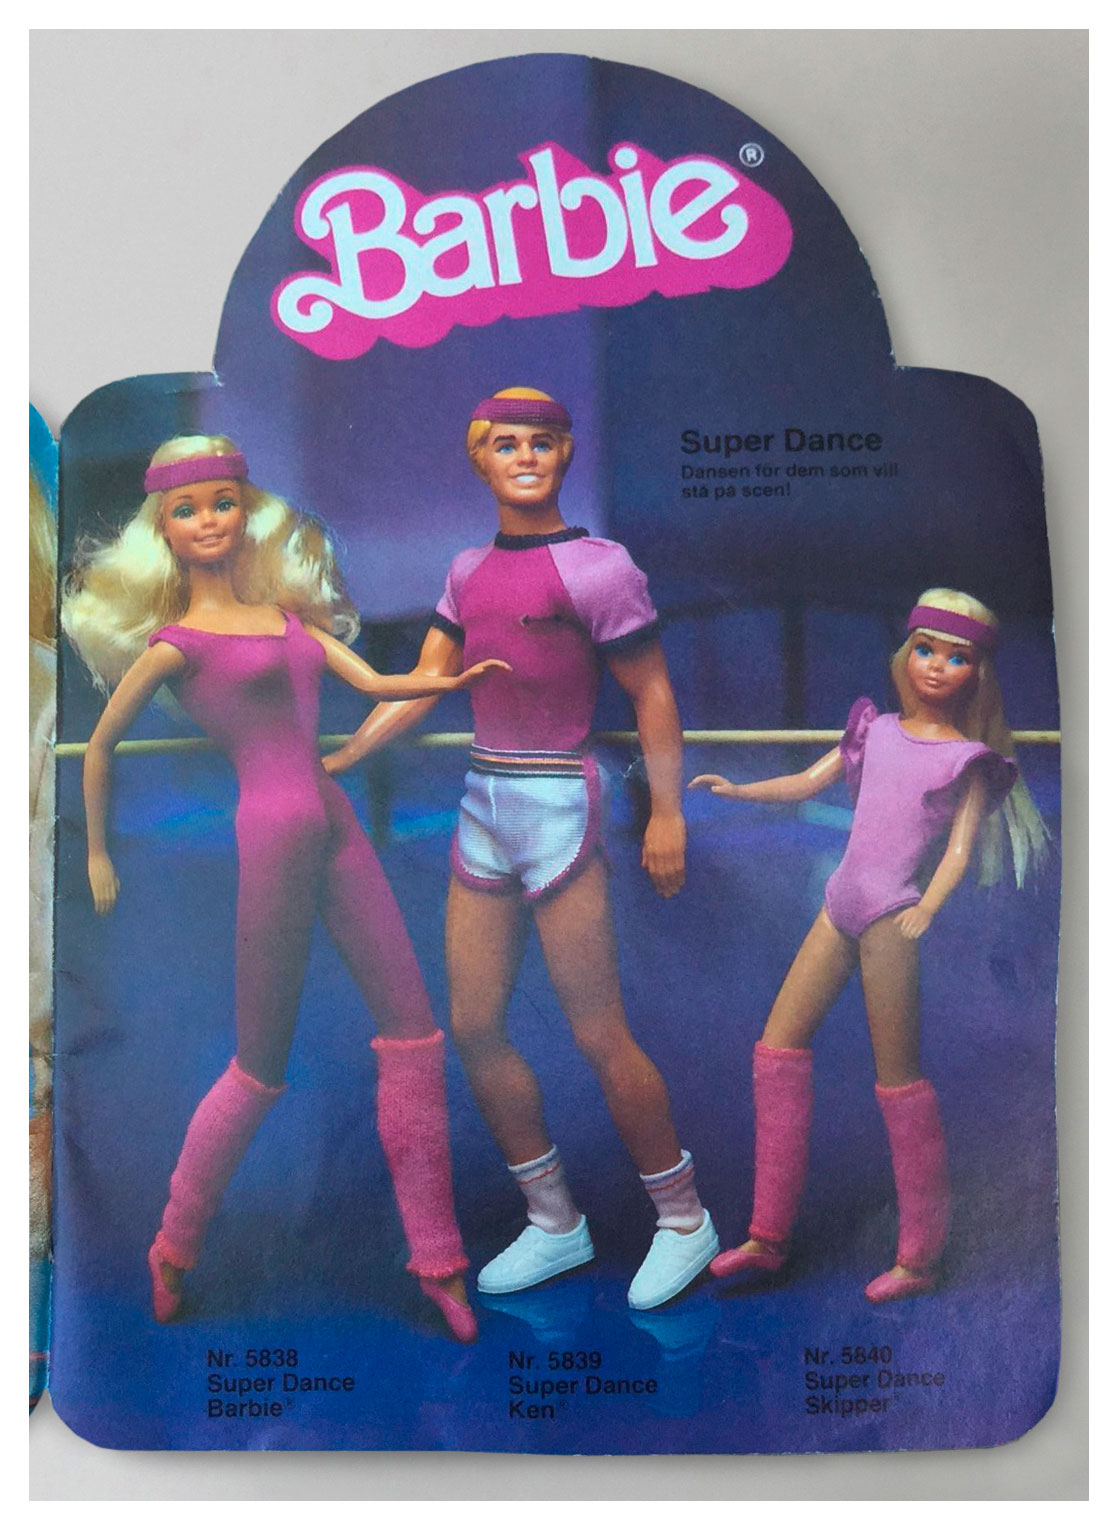 From 1983 Swedish Barbie booklet